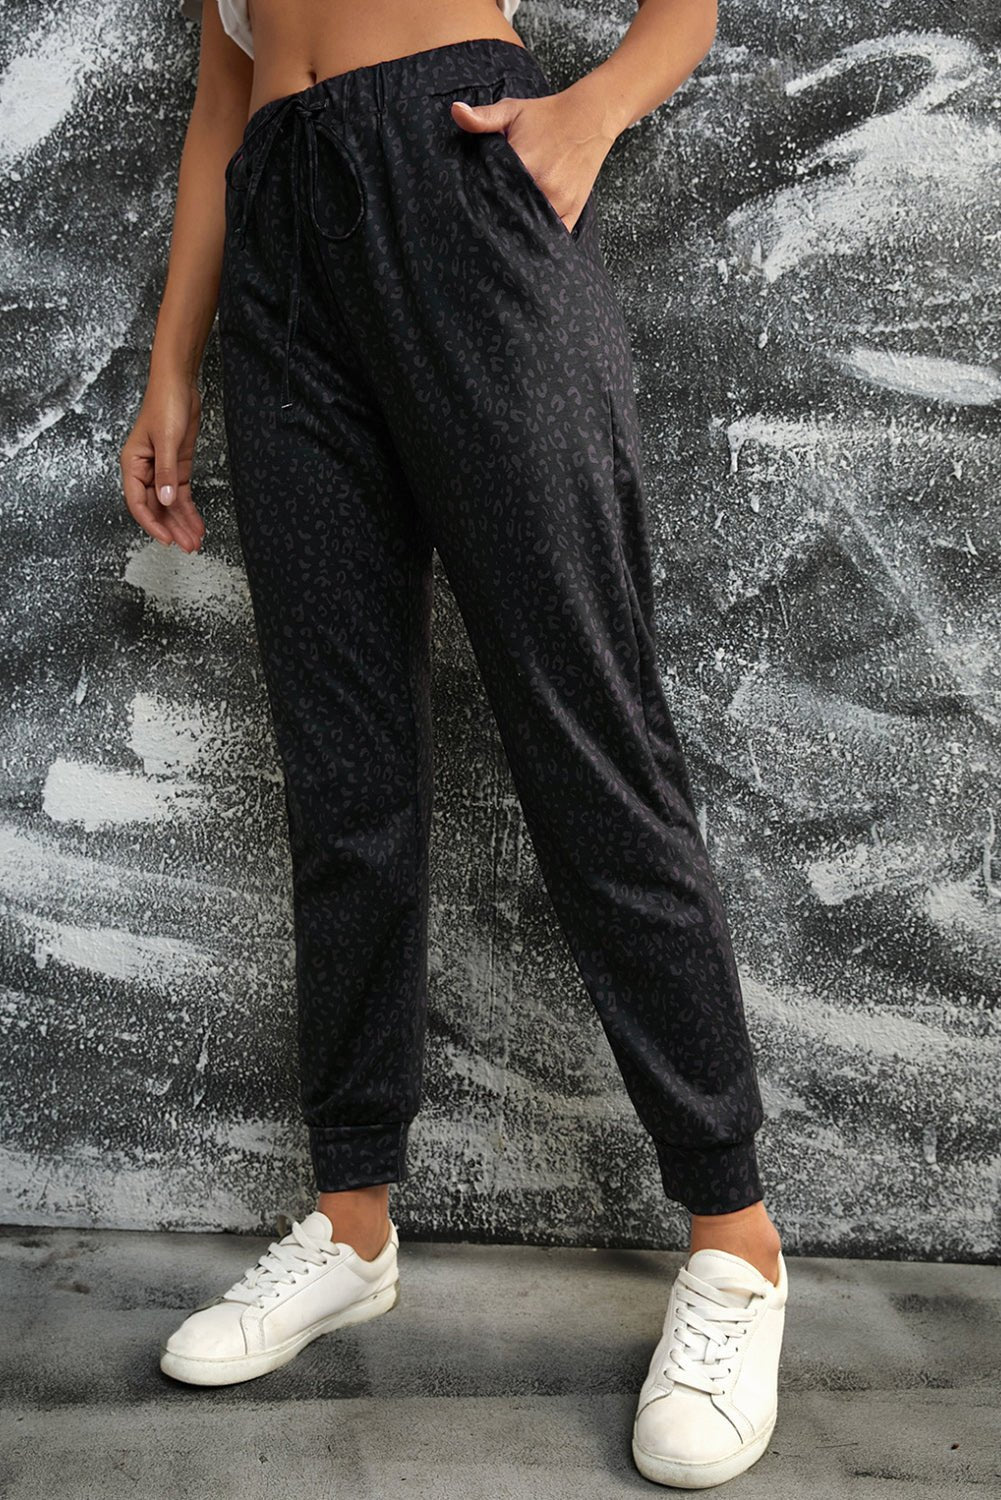 Leopard Print Joggers with Pockets - Joggers Tangerine Goddess Charcoal / S